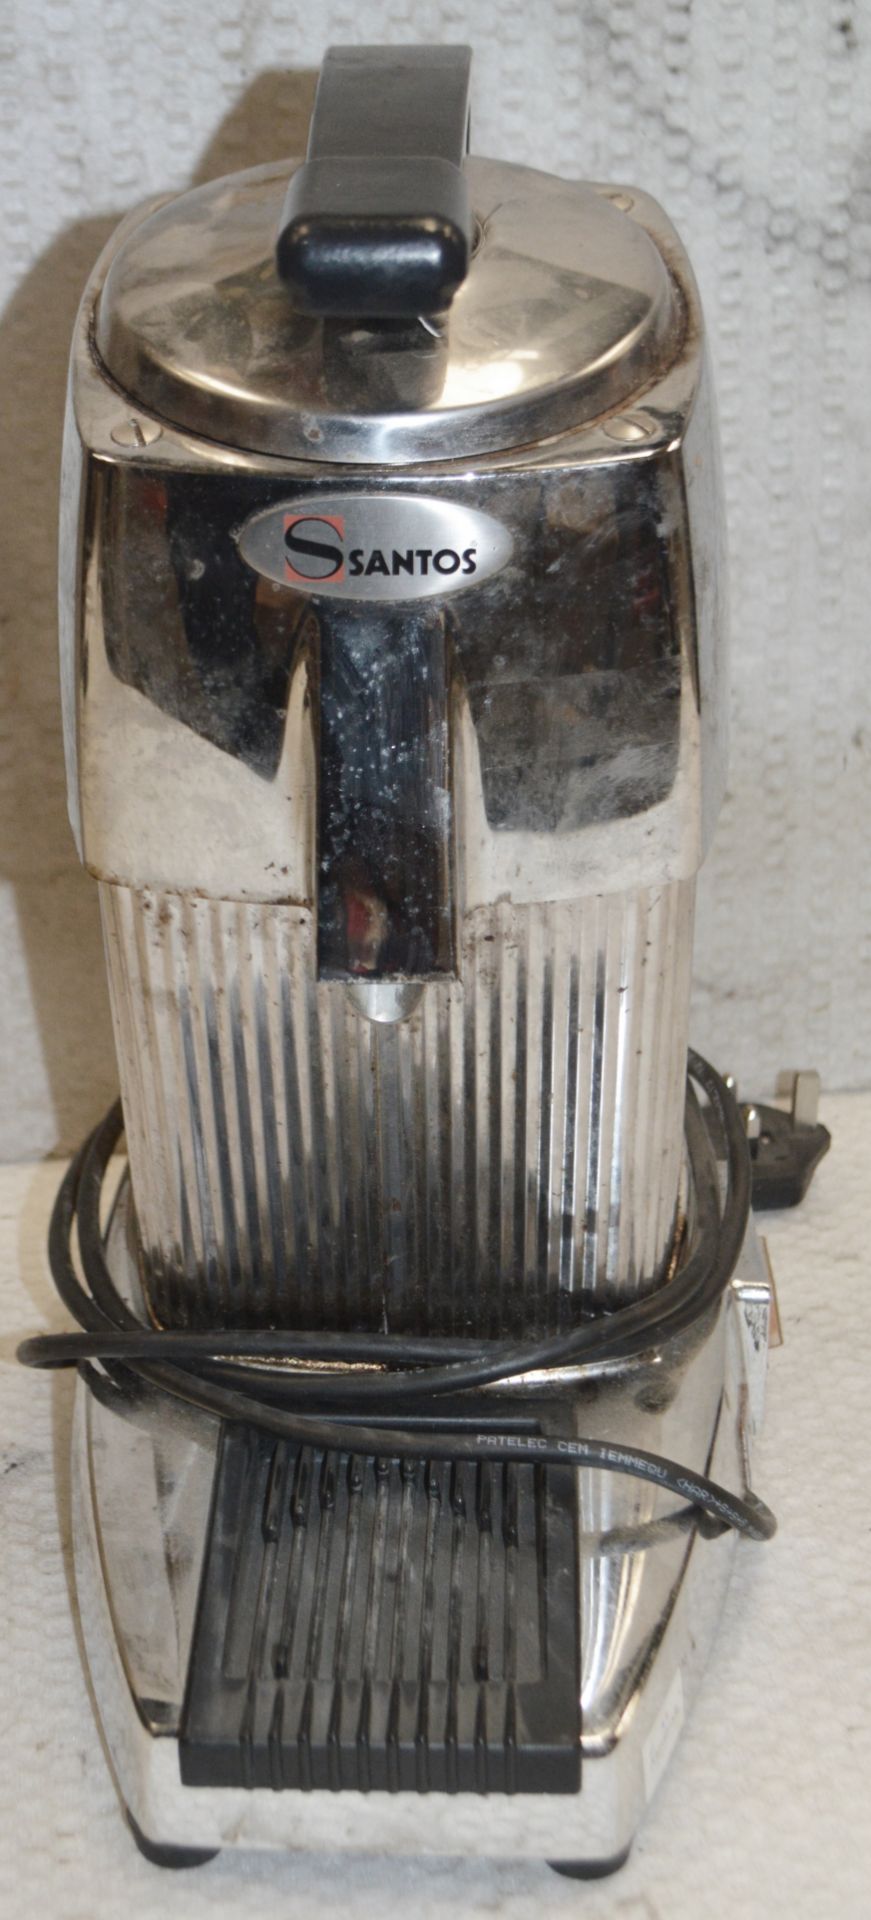 1 x Santos French Handmade Juicer - (220-240volts) - Recently Removed From A Commercial Restaurant - Image 12 of 13